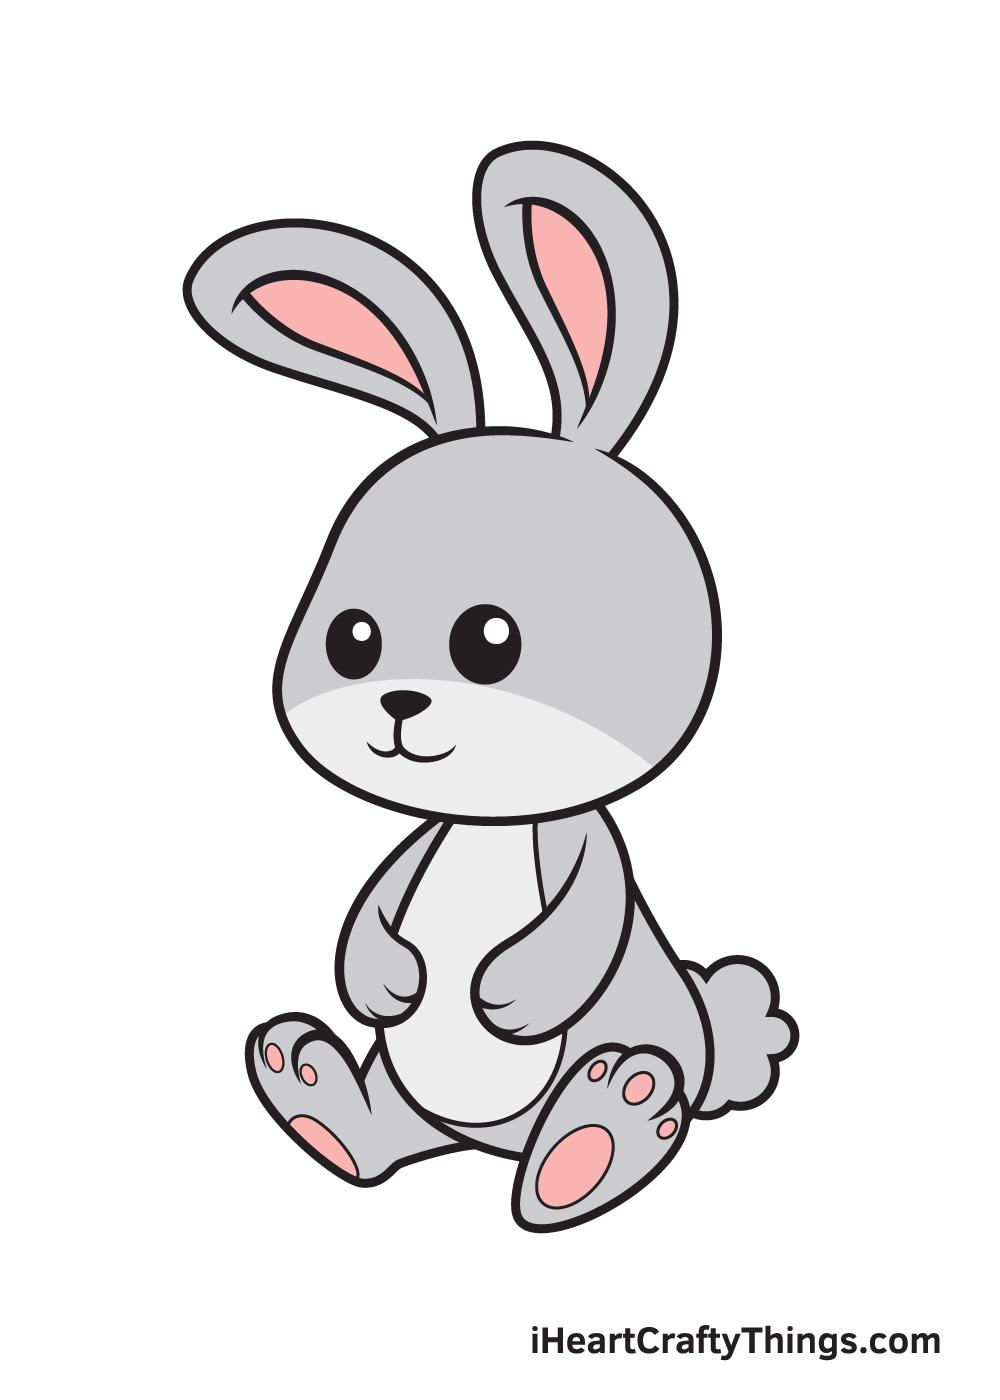 How to Draw a Rabbit - Step by Step Easy Drawing Guides - Drawing Howtos-nextbuild.com.vn